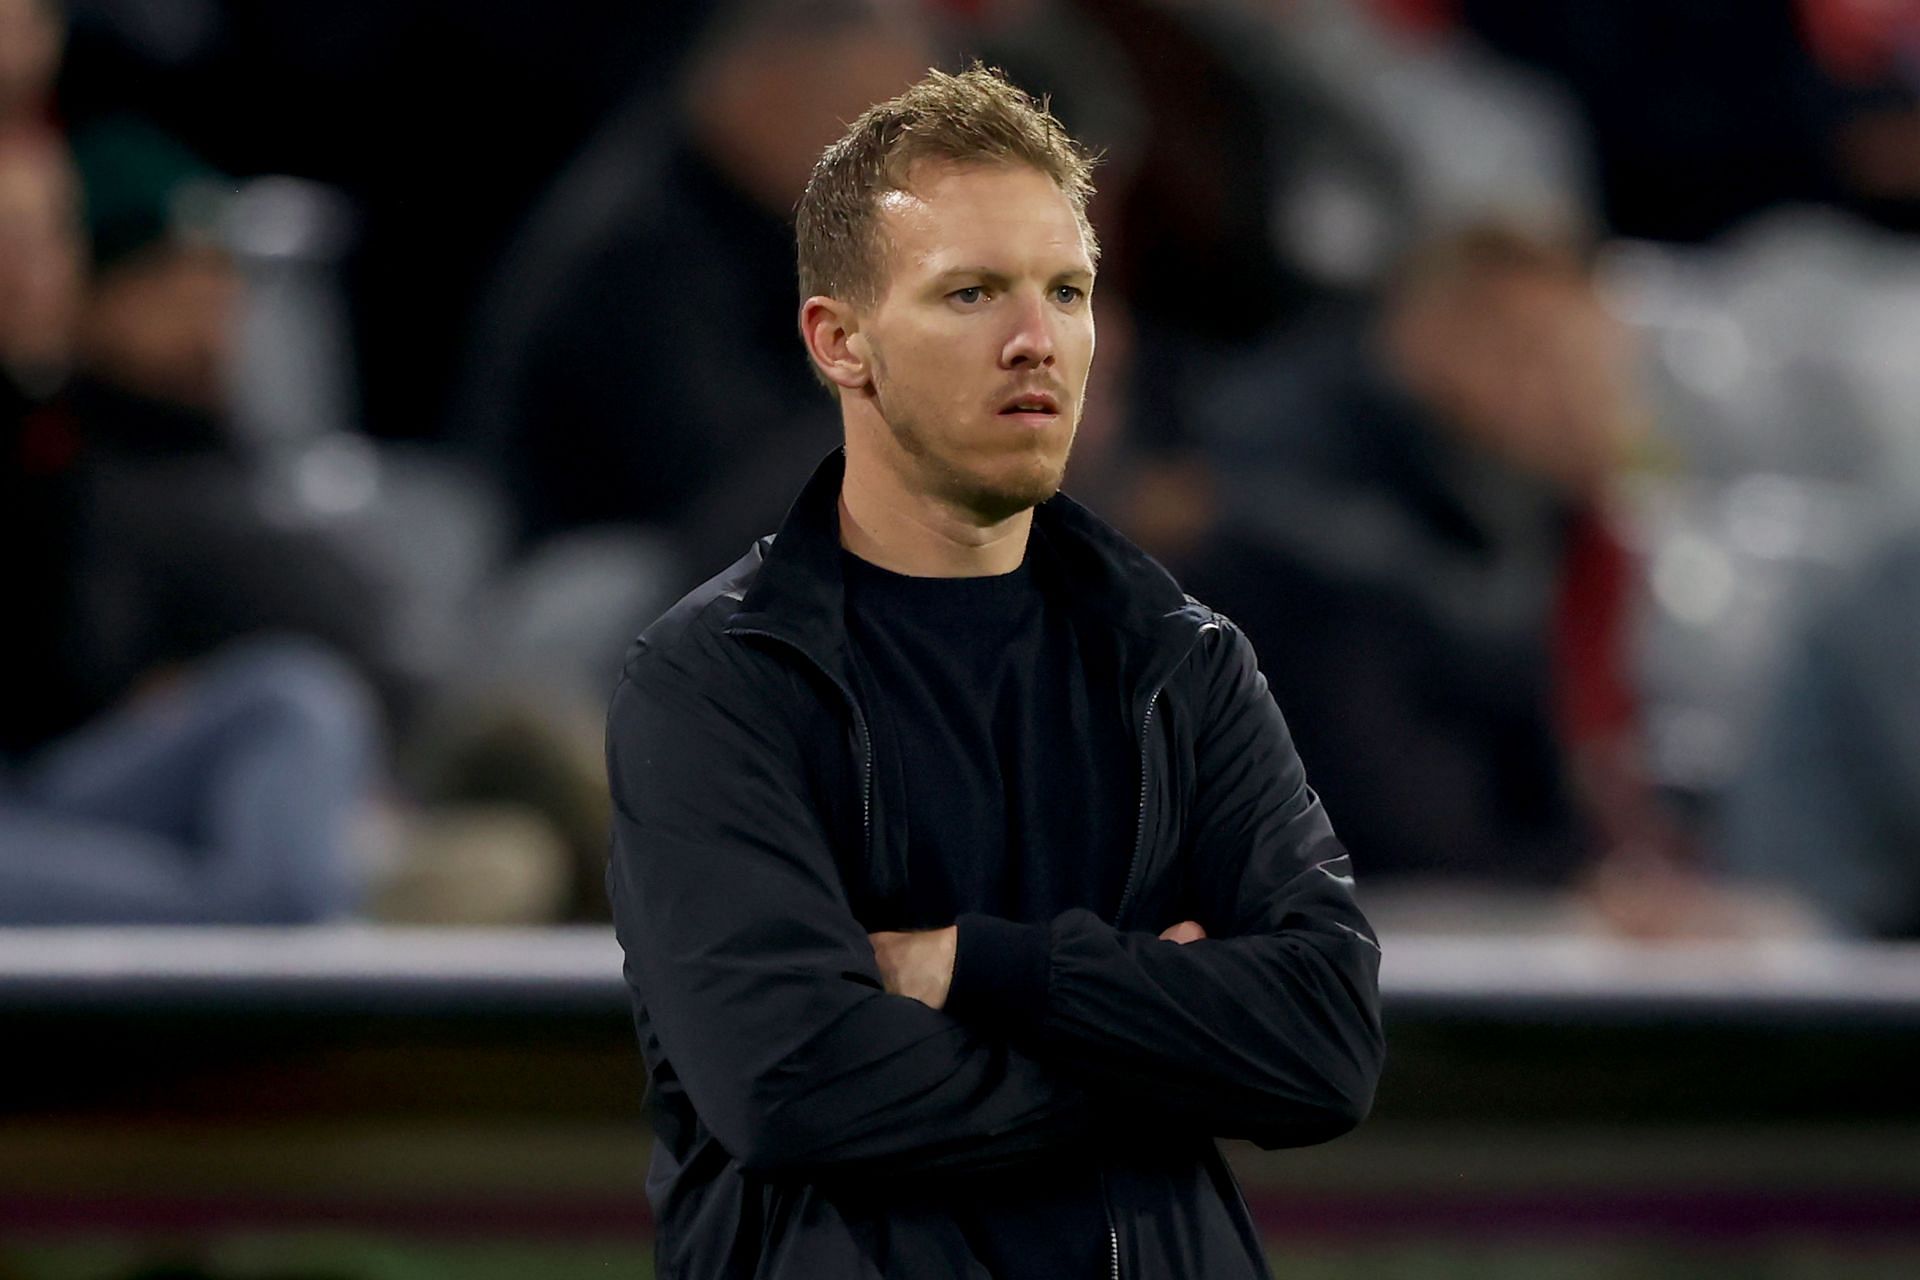 Julian Nagelsmann is proving to be one of the most exciting young managers across Europe.